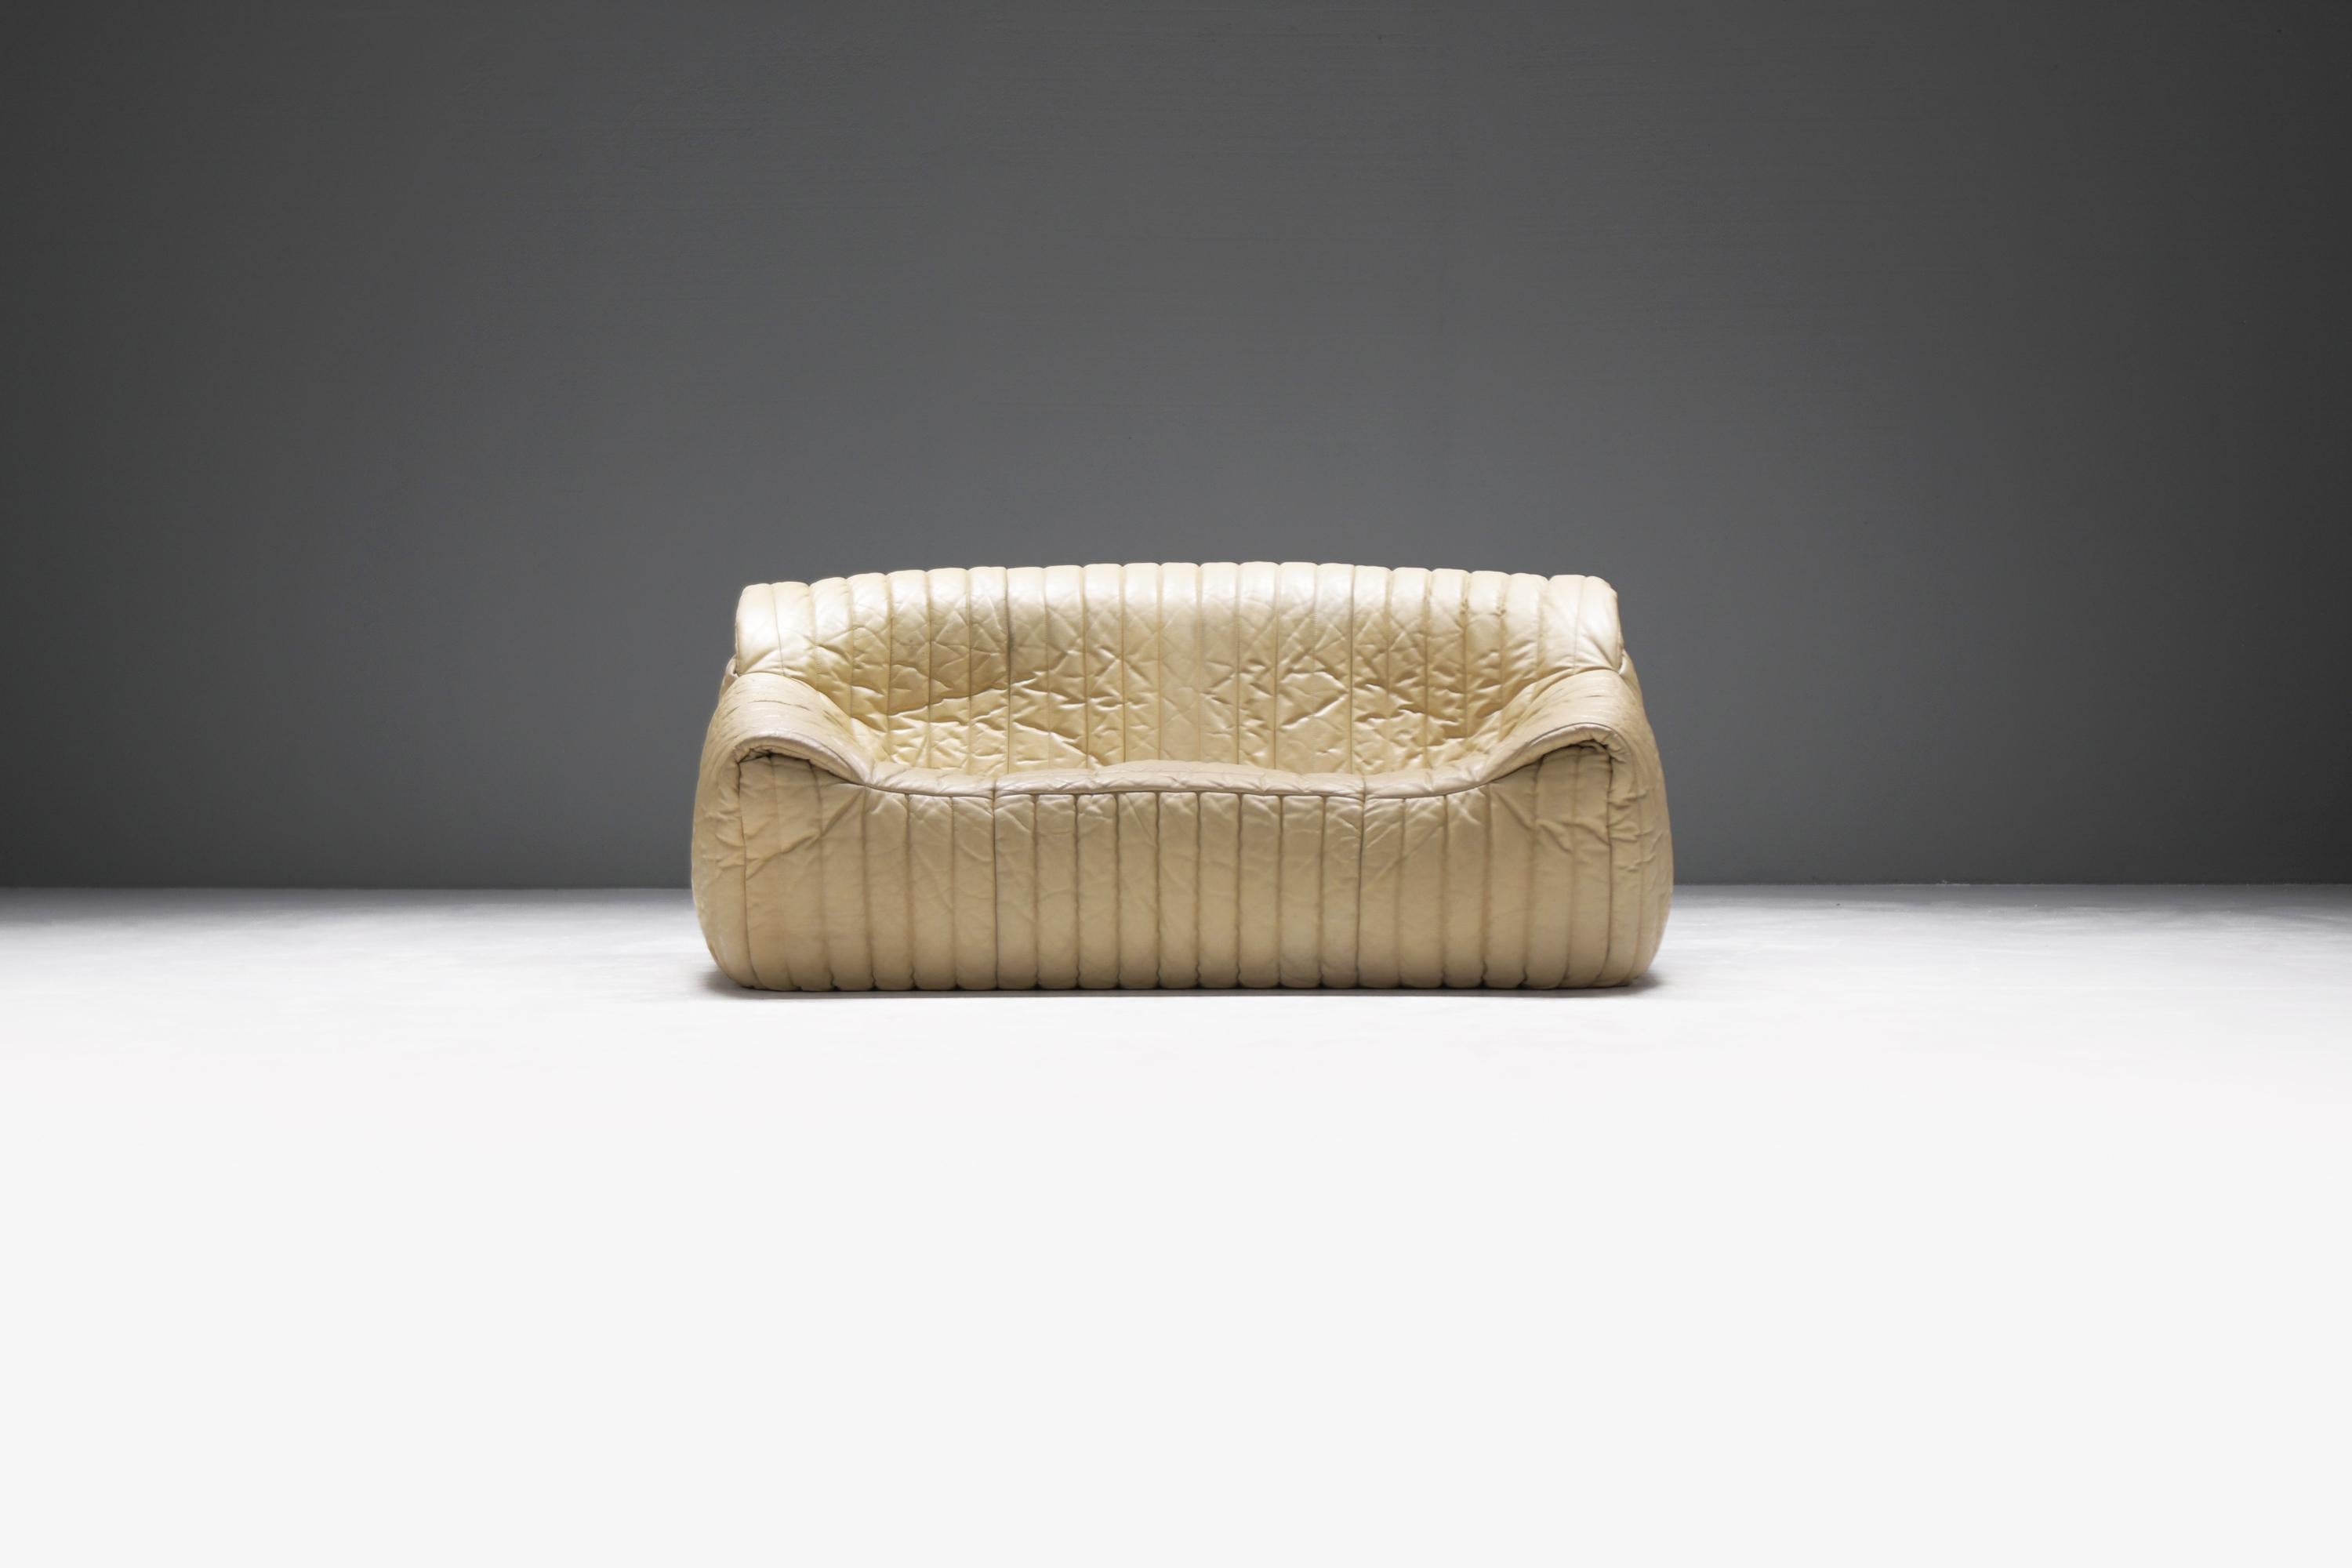 
Exceptional SANDRA lounge sofa in its original vintage cream/beige leather.
Designed by Annie Hieronimus for Cinna France.

French designer Annie Hieronimus created the Sandra almost immediately after her start at Roset Bureau d'Études in 1976. The